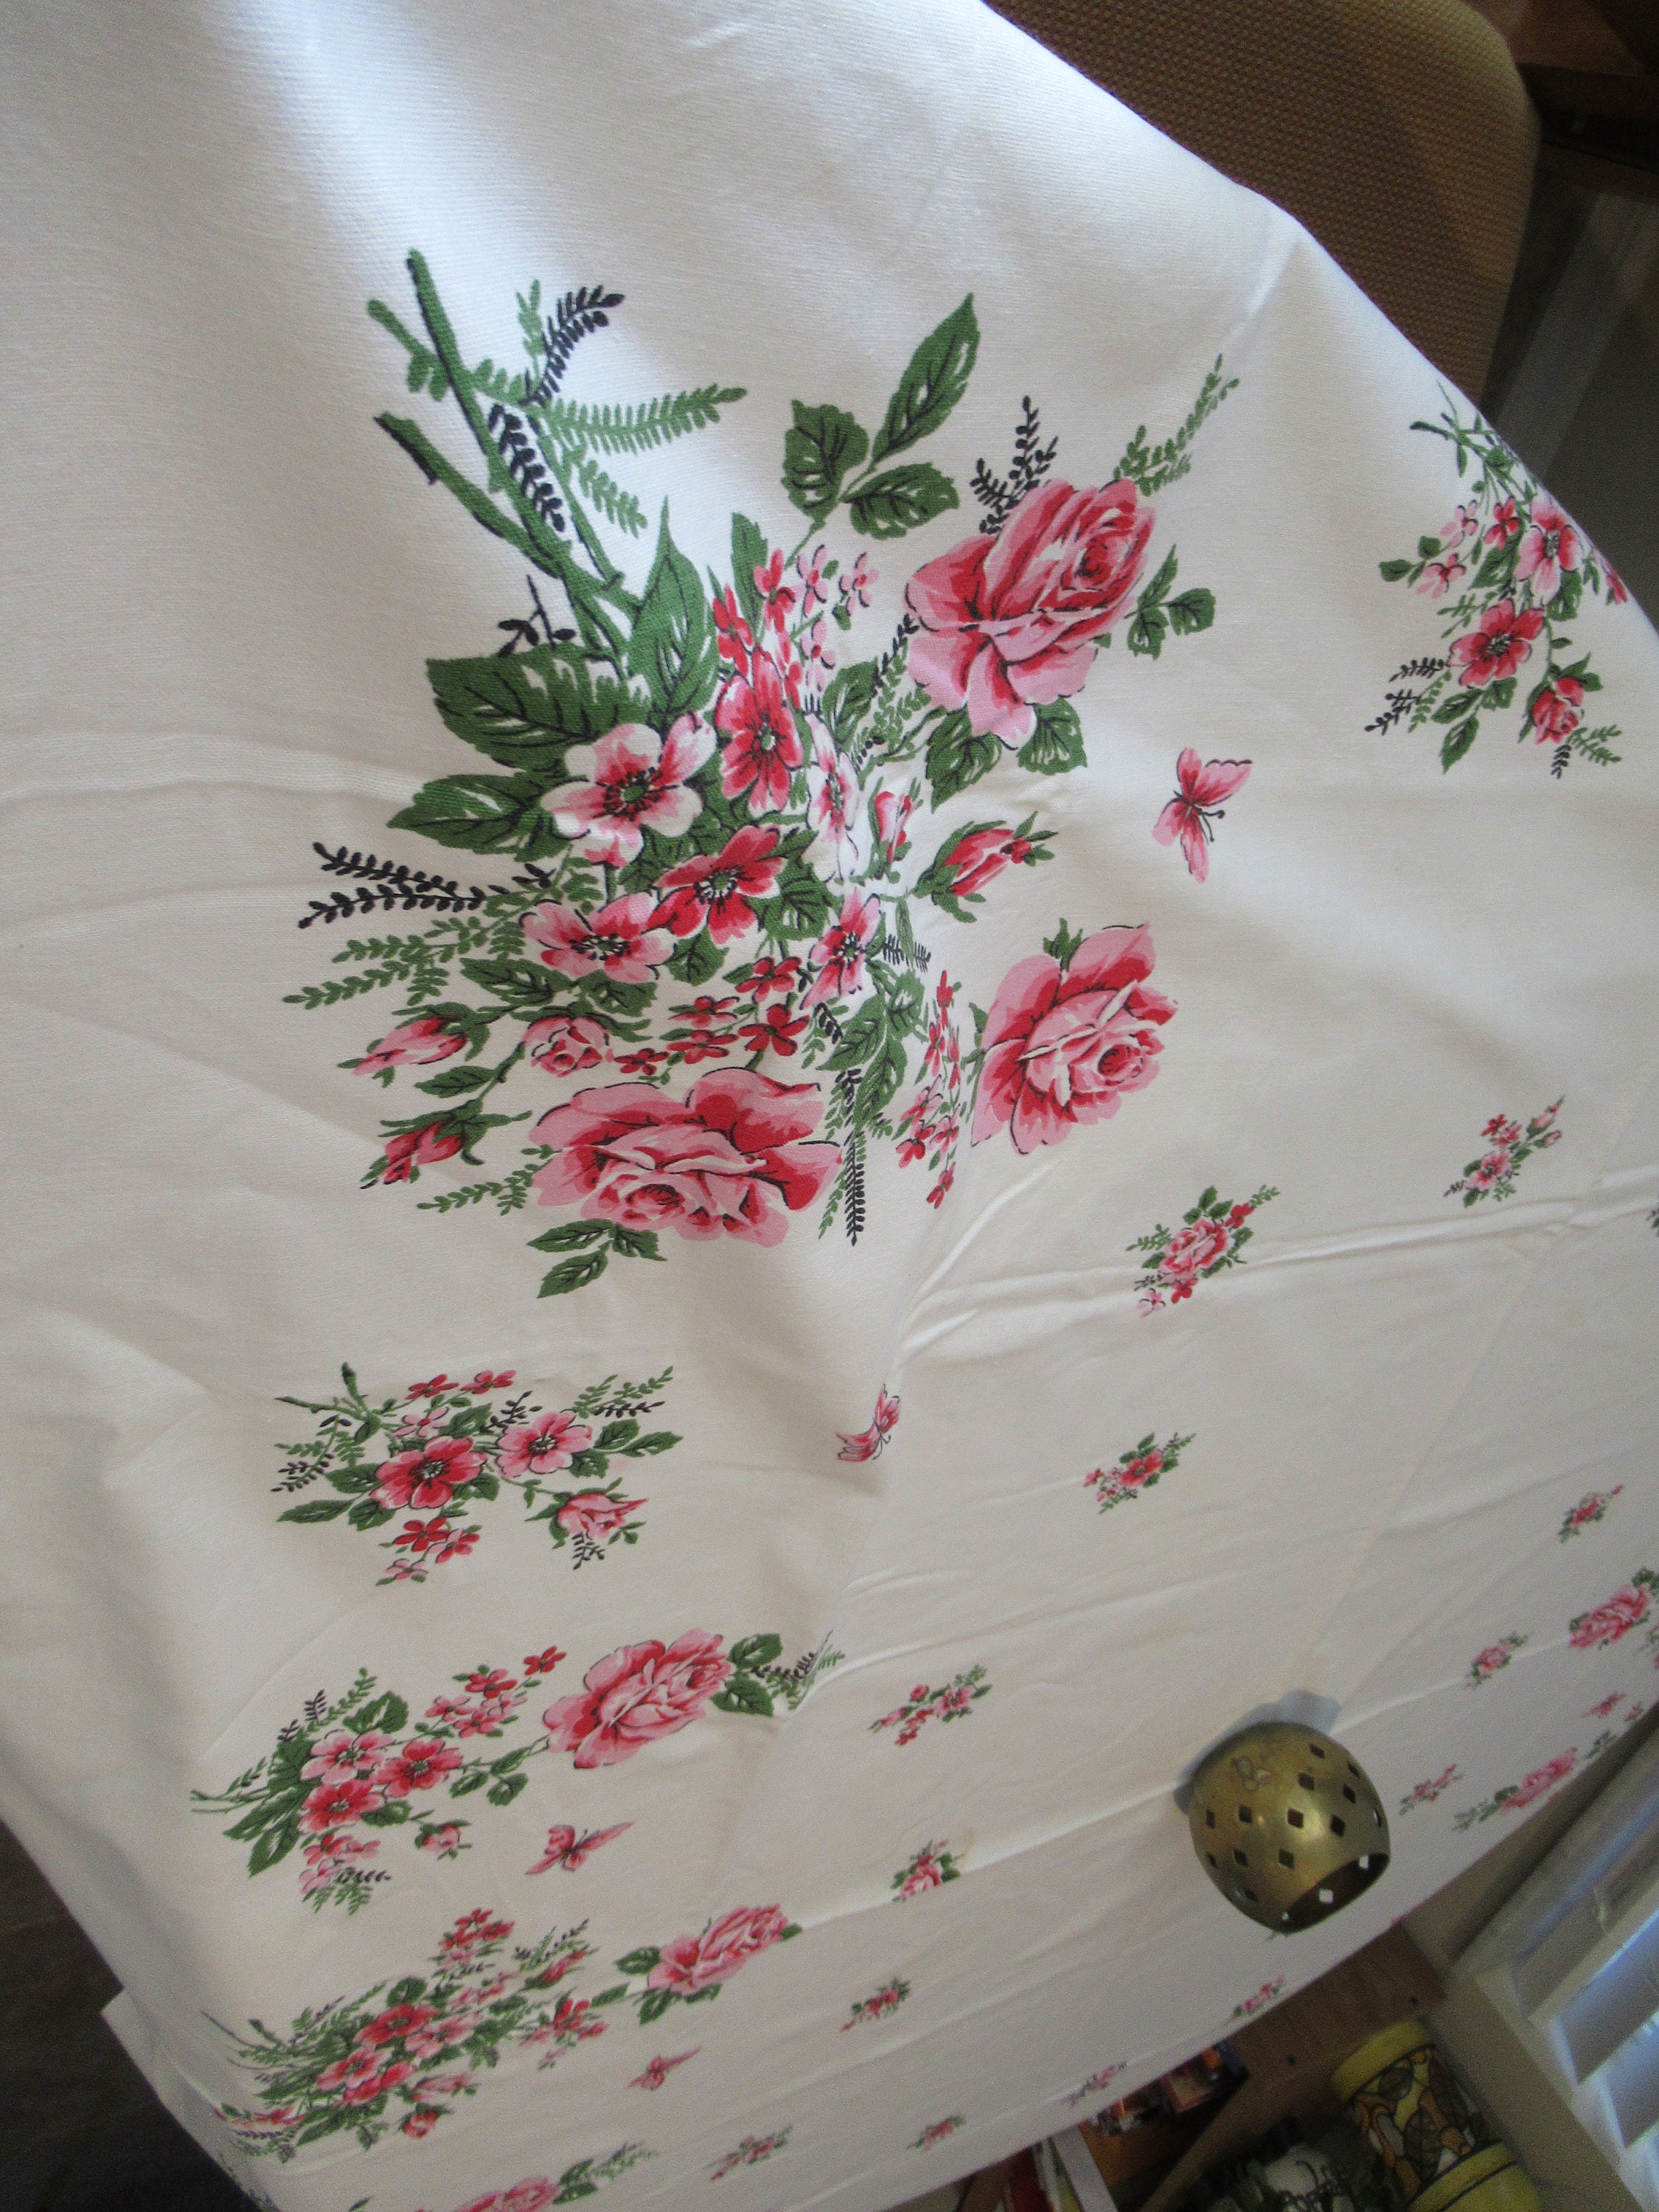 Vintage Red and Pink Rose and Dainty Flowers Tablecloth - Etsy